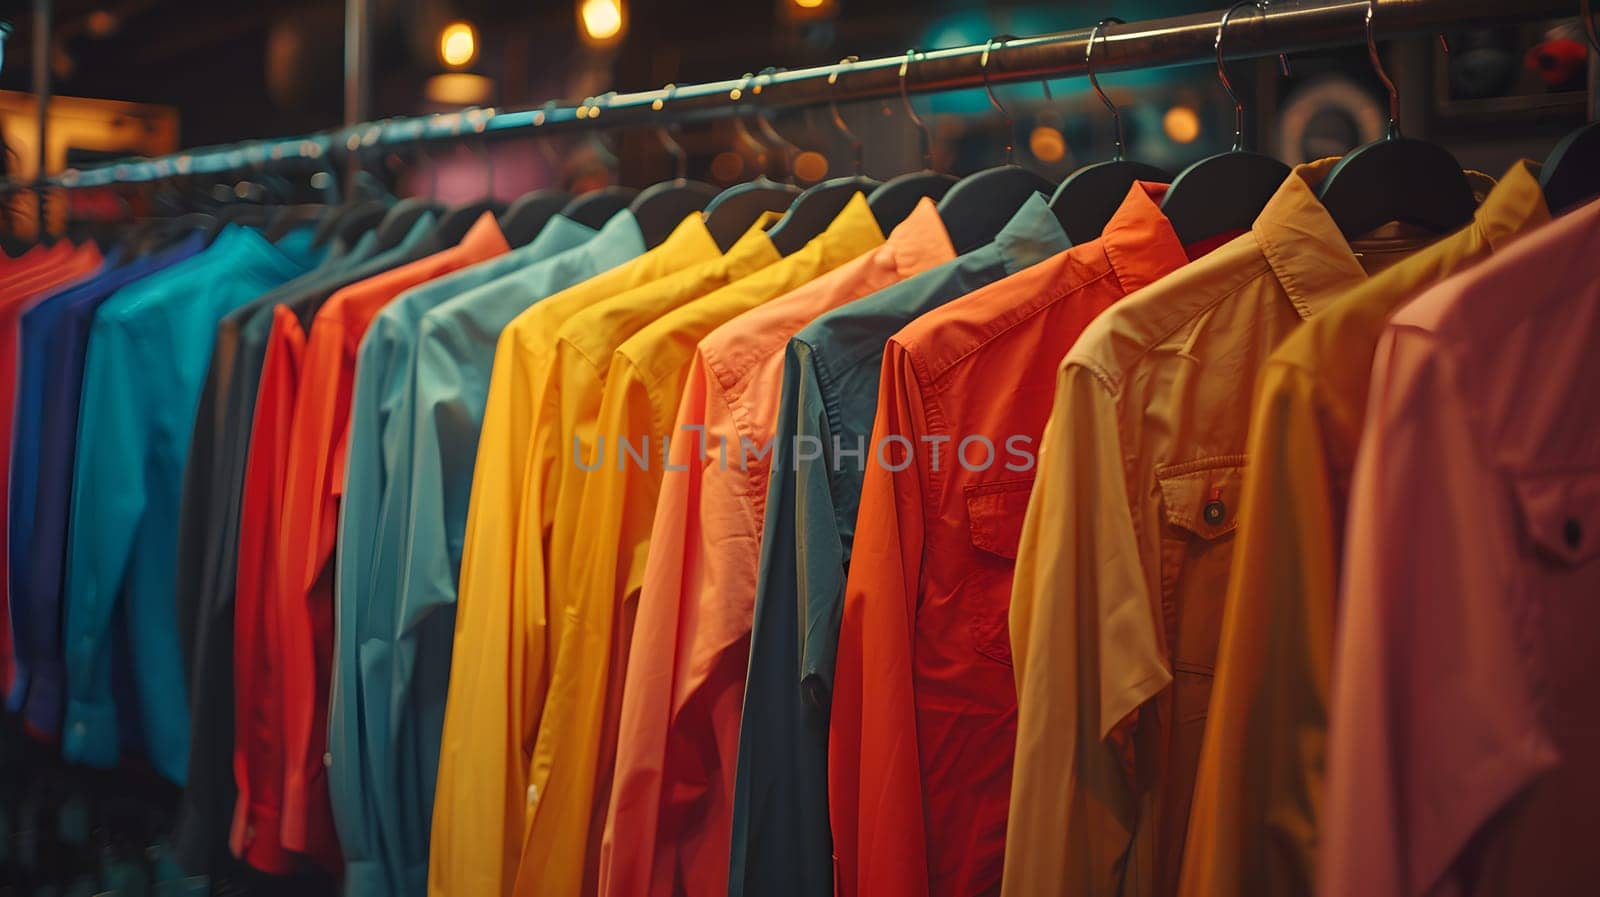 Sportswear jerseys on display at a city market event by Nadtochiy